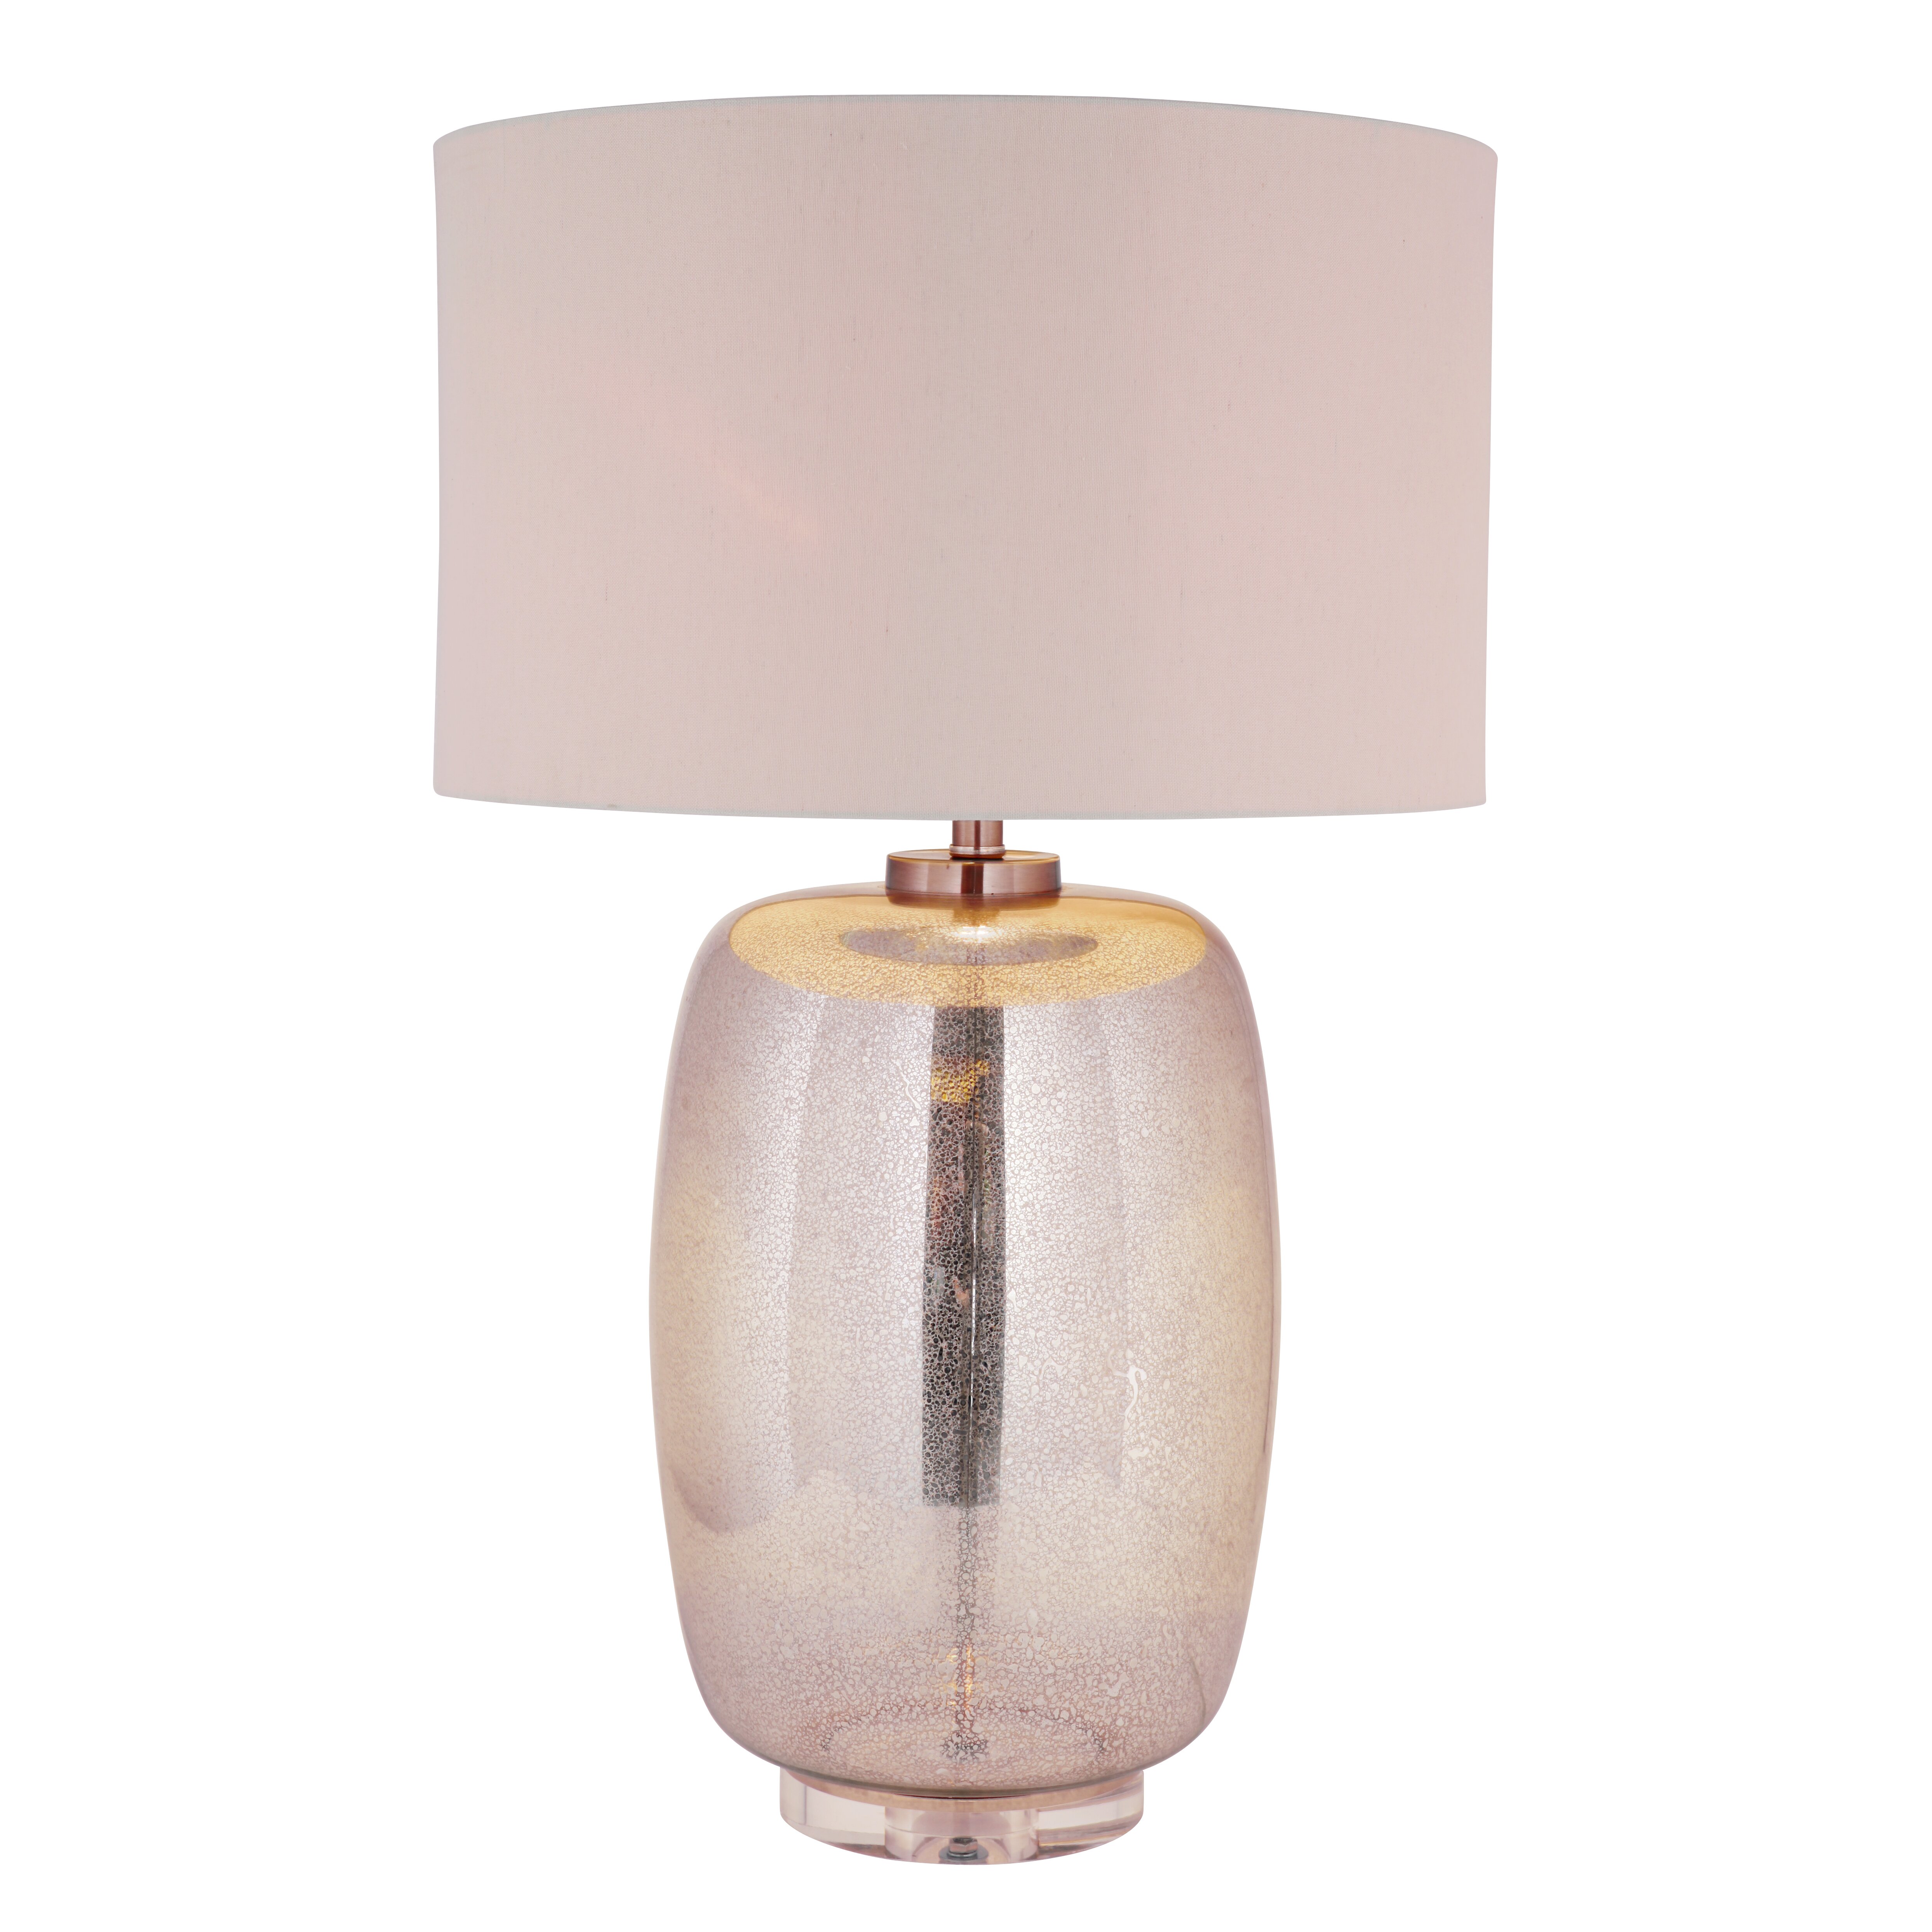 MarianaHome The Grande 32 5" H Table Lamp with Drum Shade